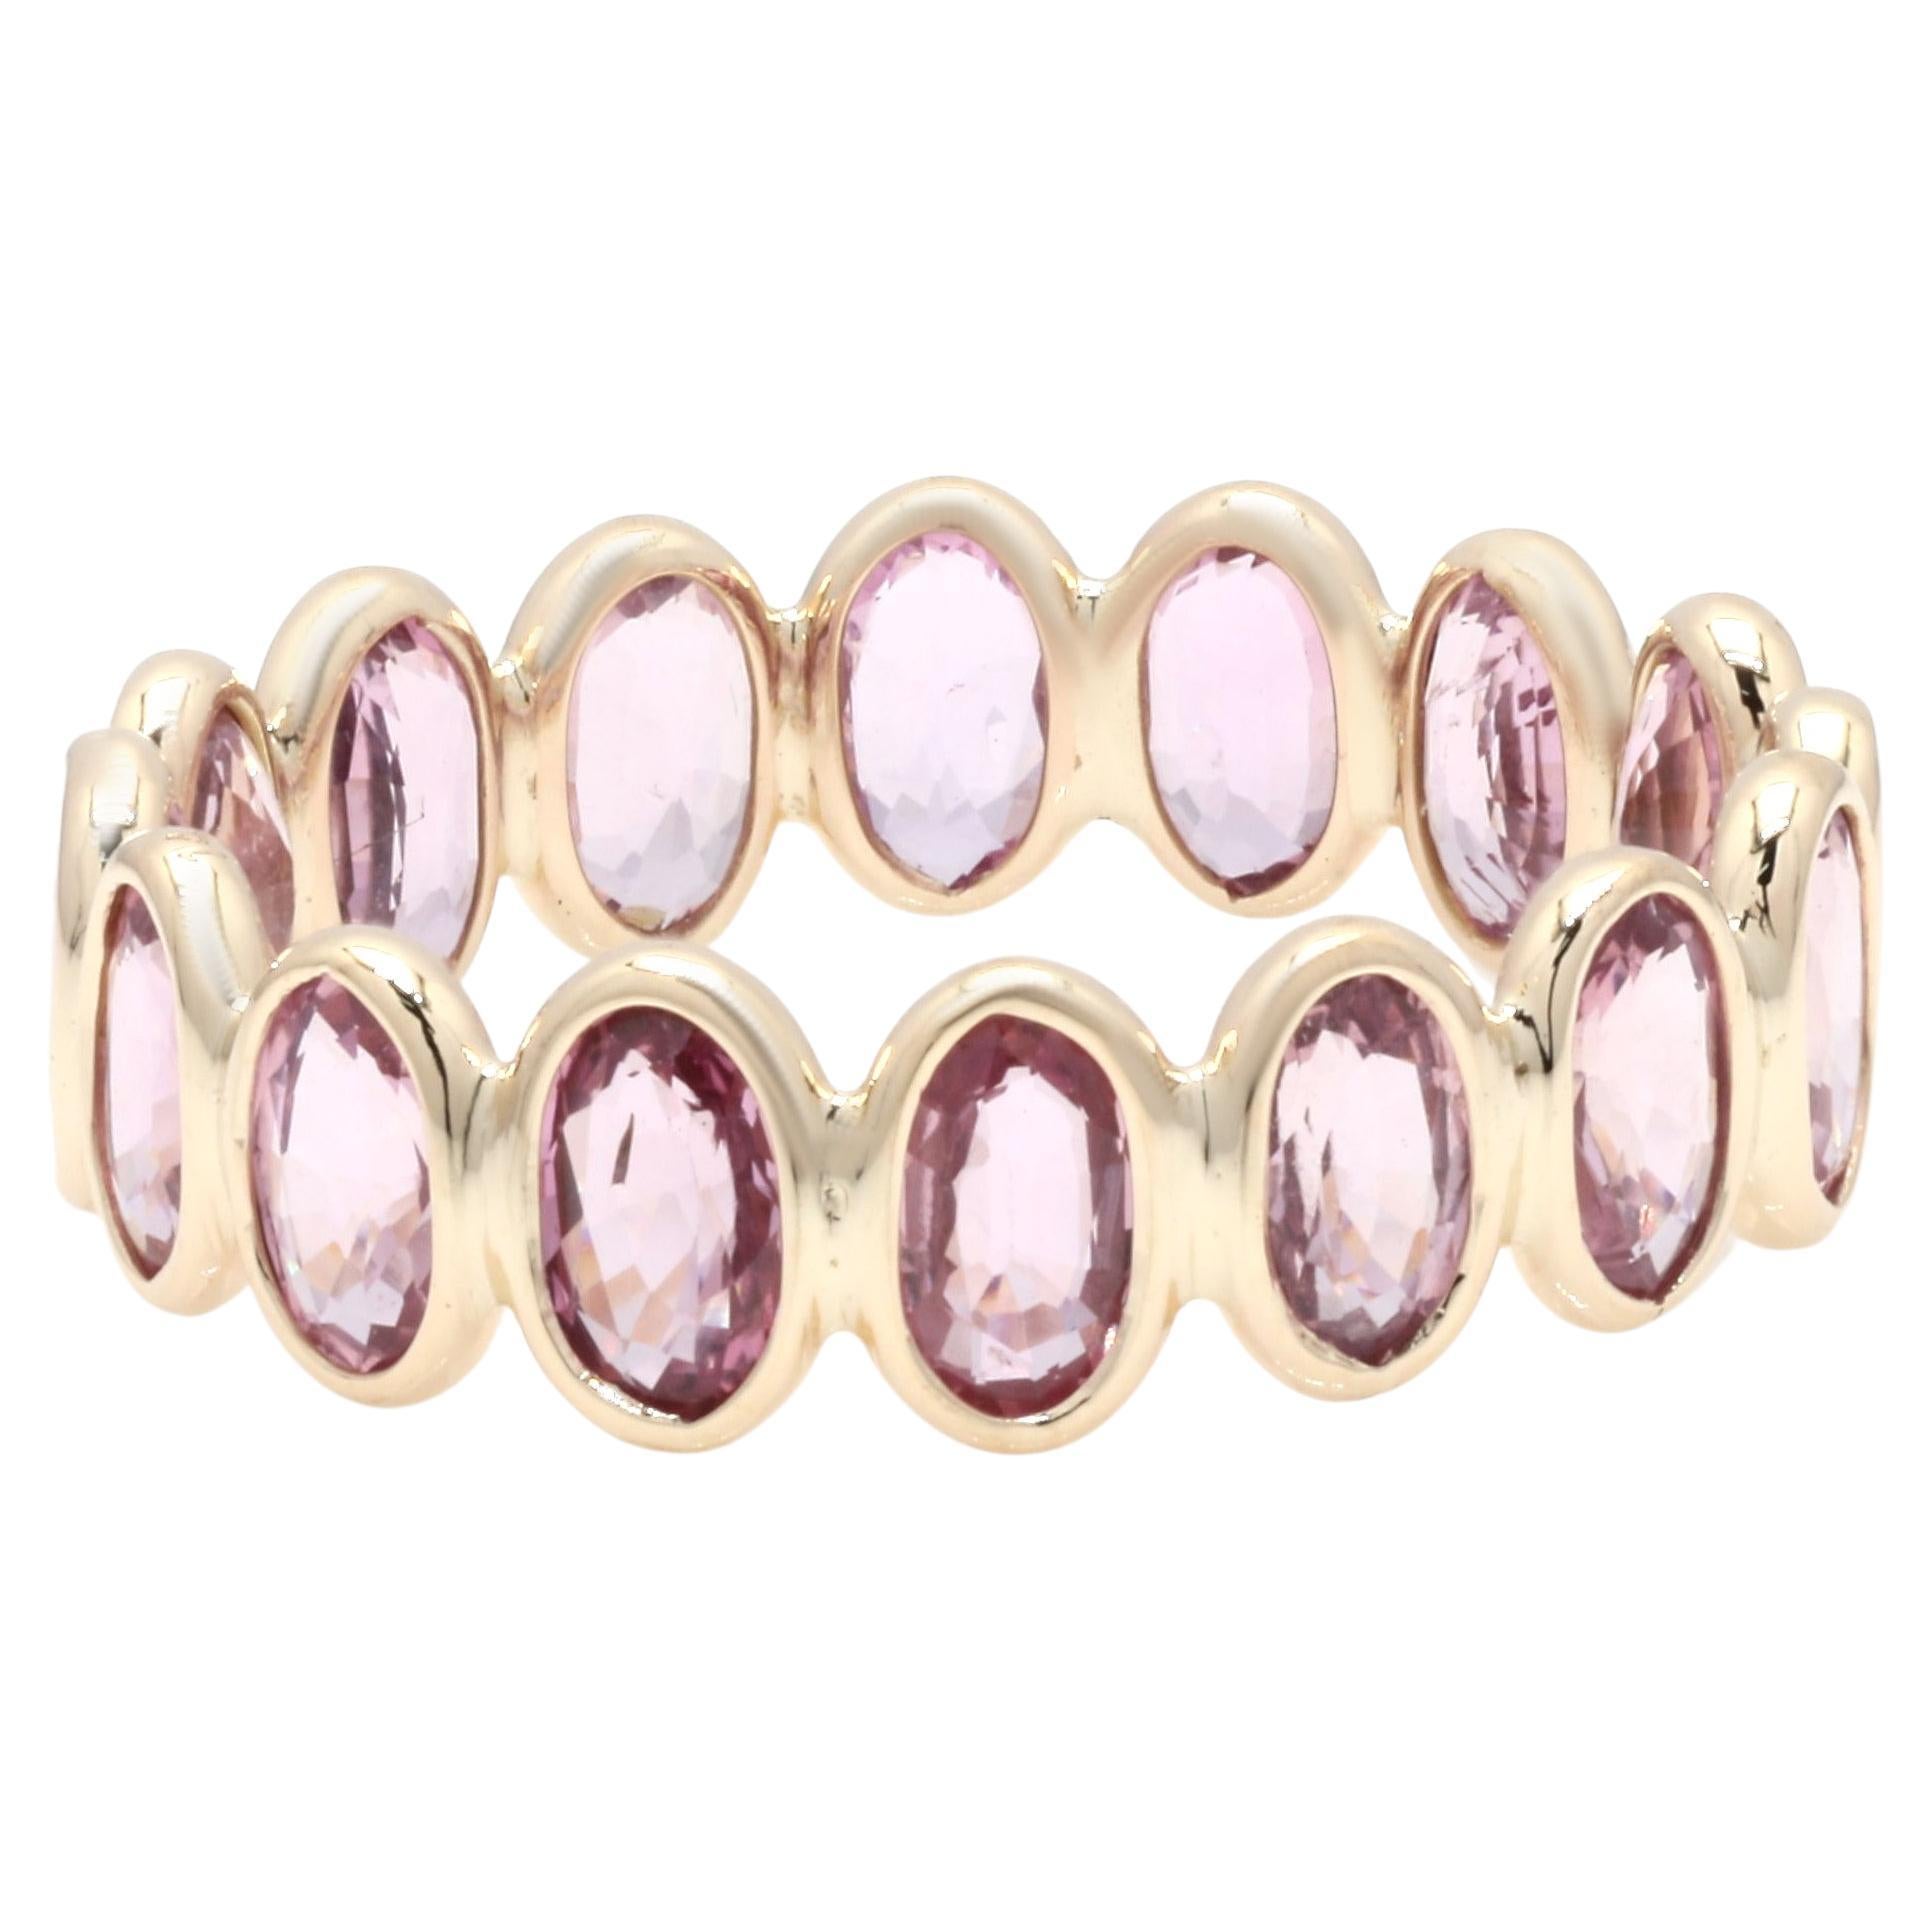 For Sale:  Handmade 4.47 Ct Oval Pink Sapphire Birthstone Eternity Ring in 14K Yellow Gold